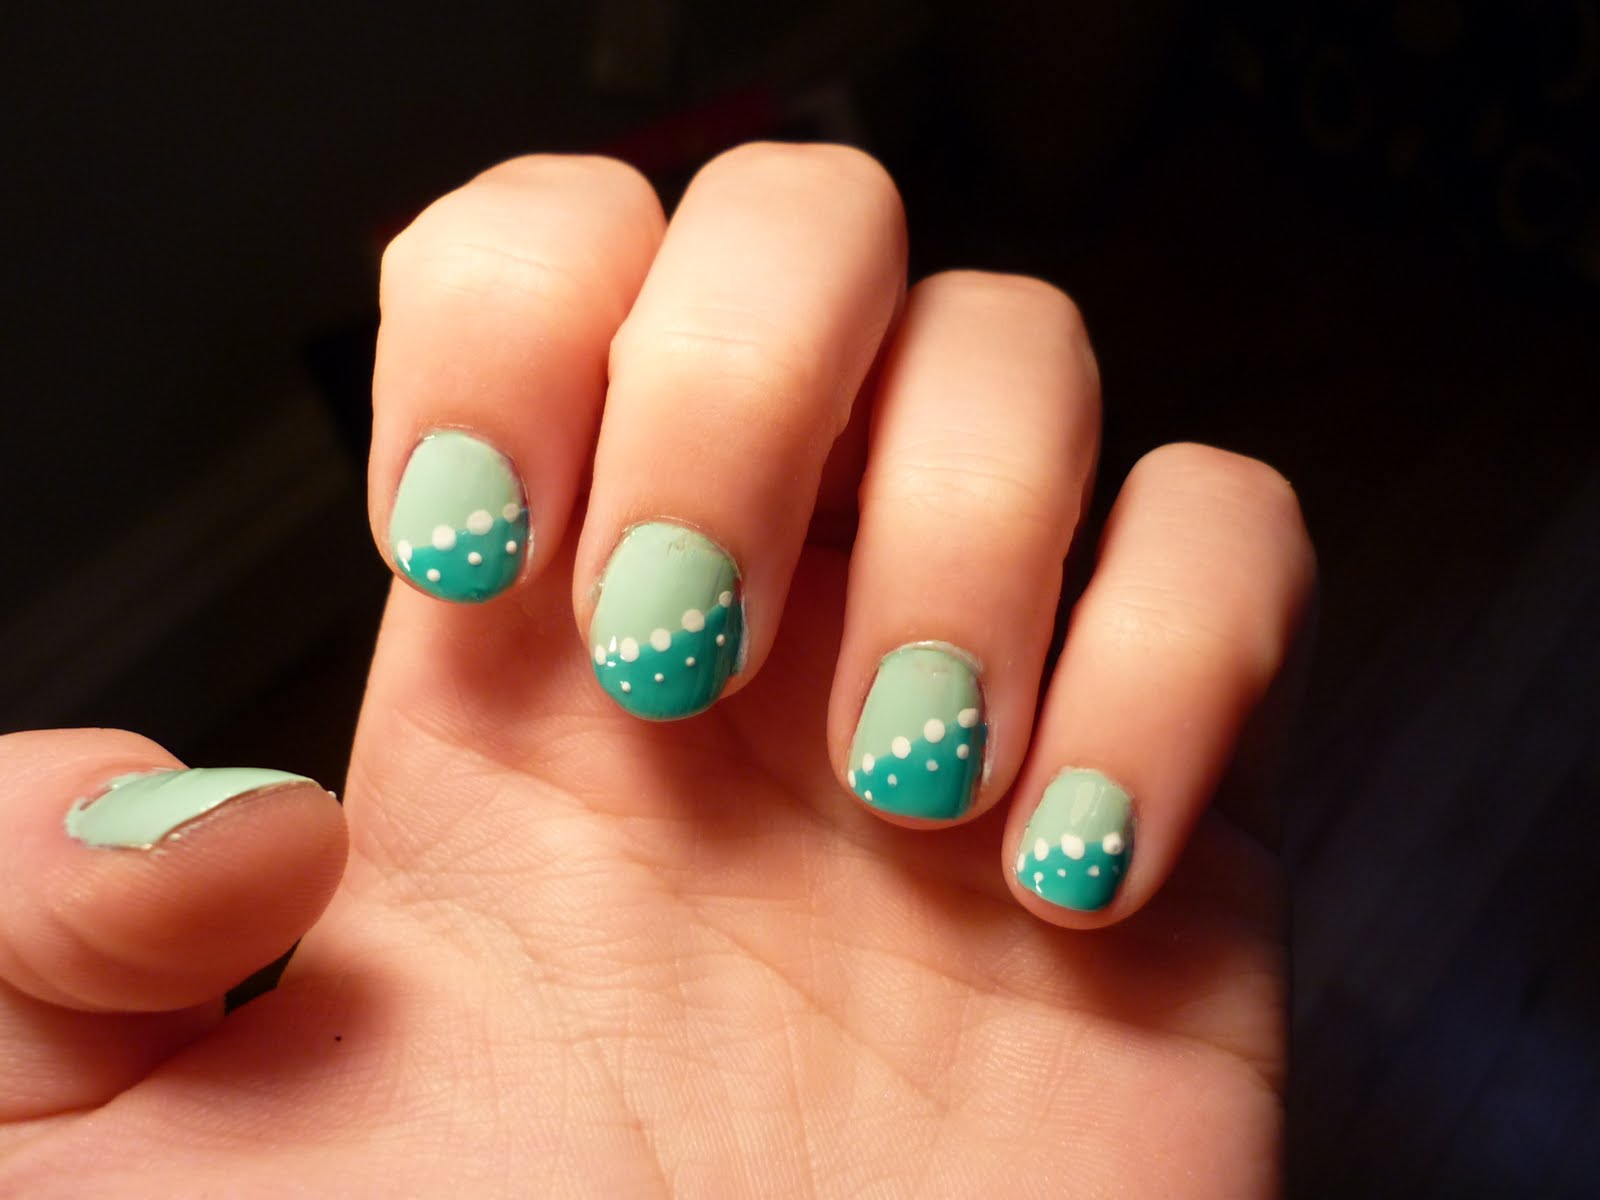 1. Simple and Easy Nail Art Designs for Beginners - wide 2